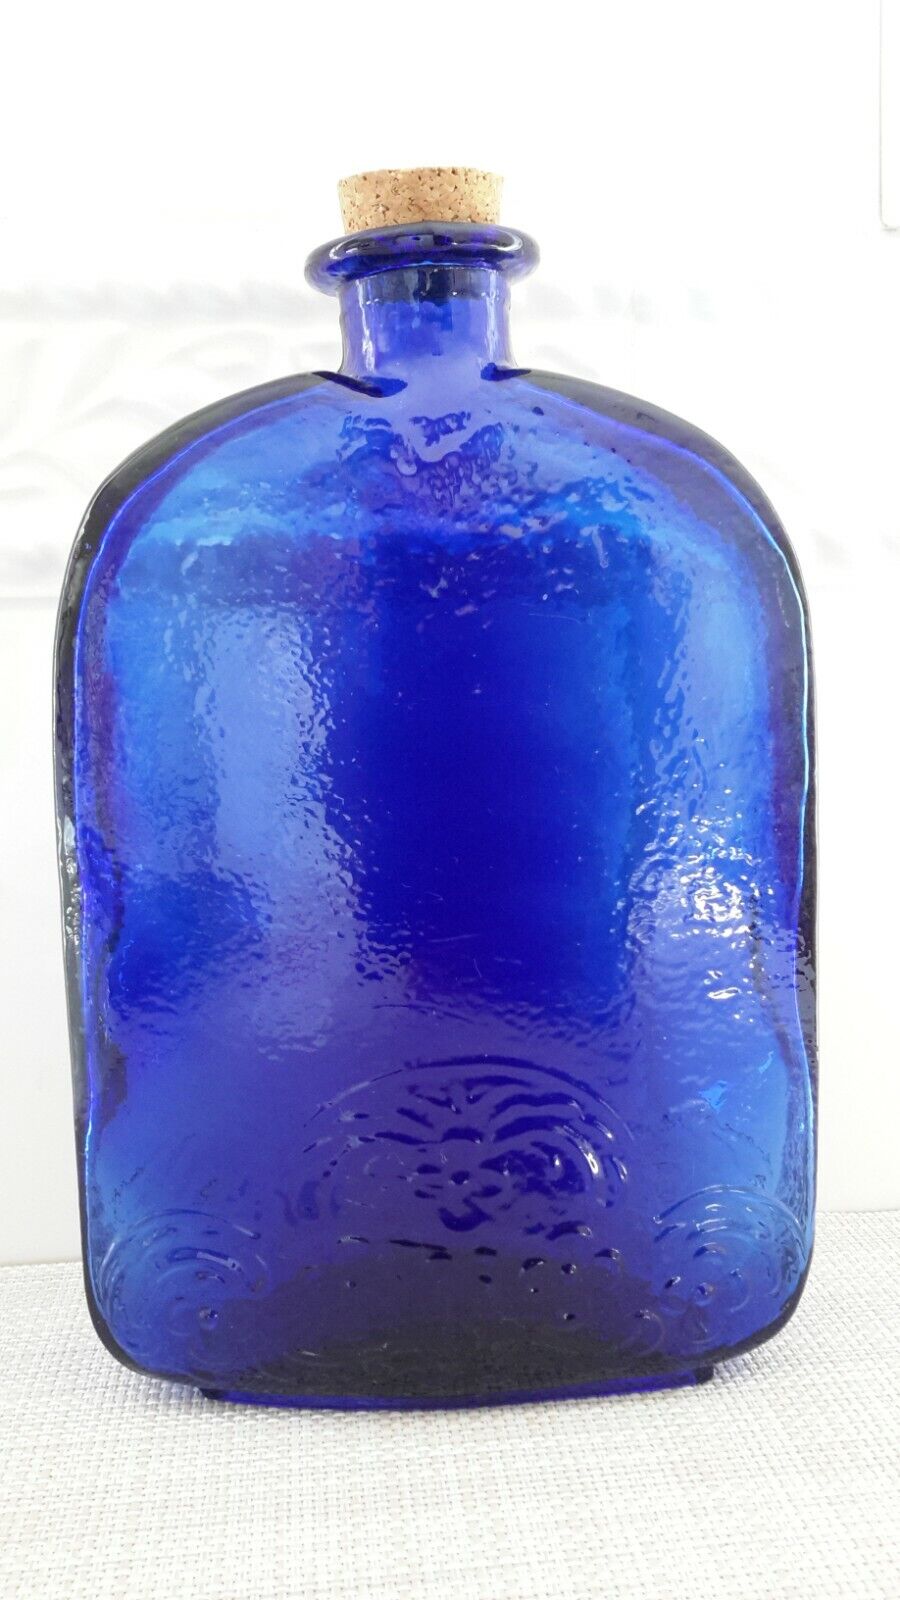 Whole Housewares 10.5 H 18 Ounce Blue Glass Decorative Bottles Fish Shaped Bottles with Cork Set of 2